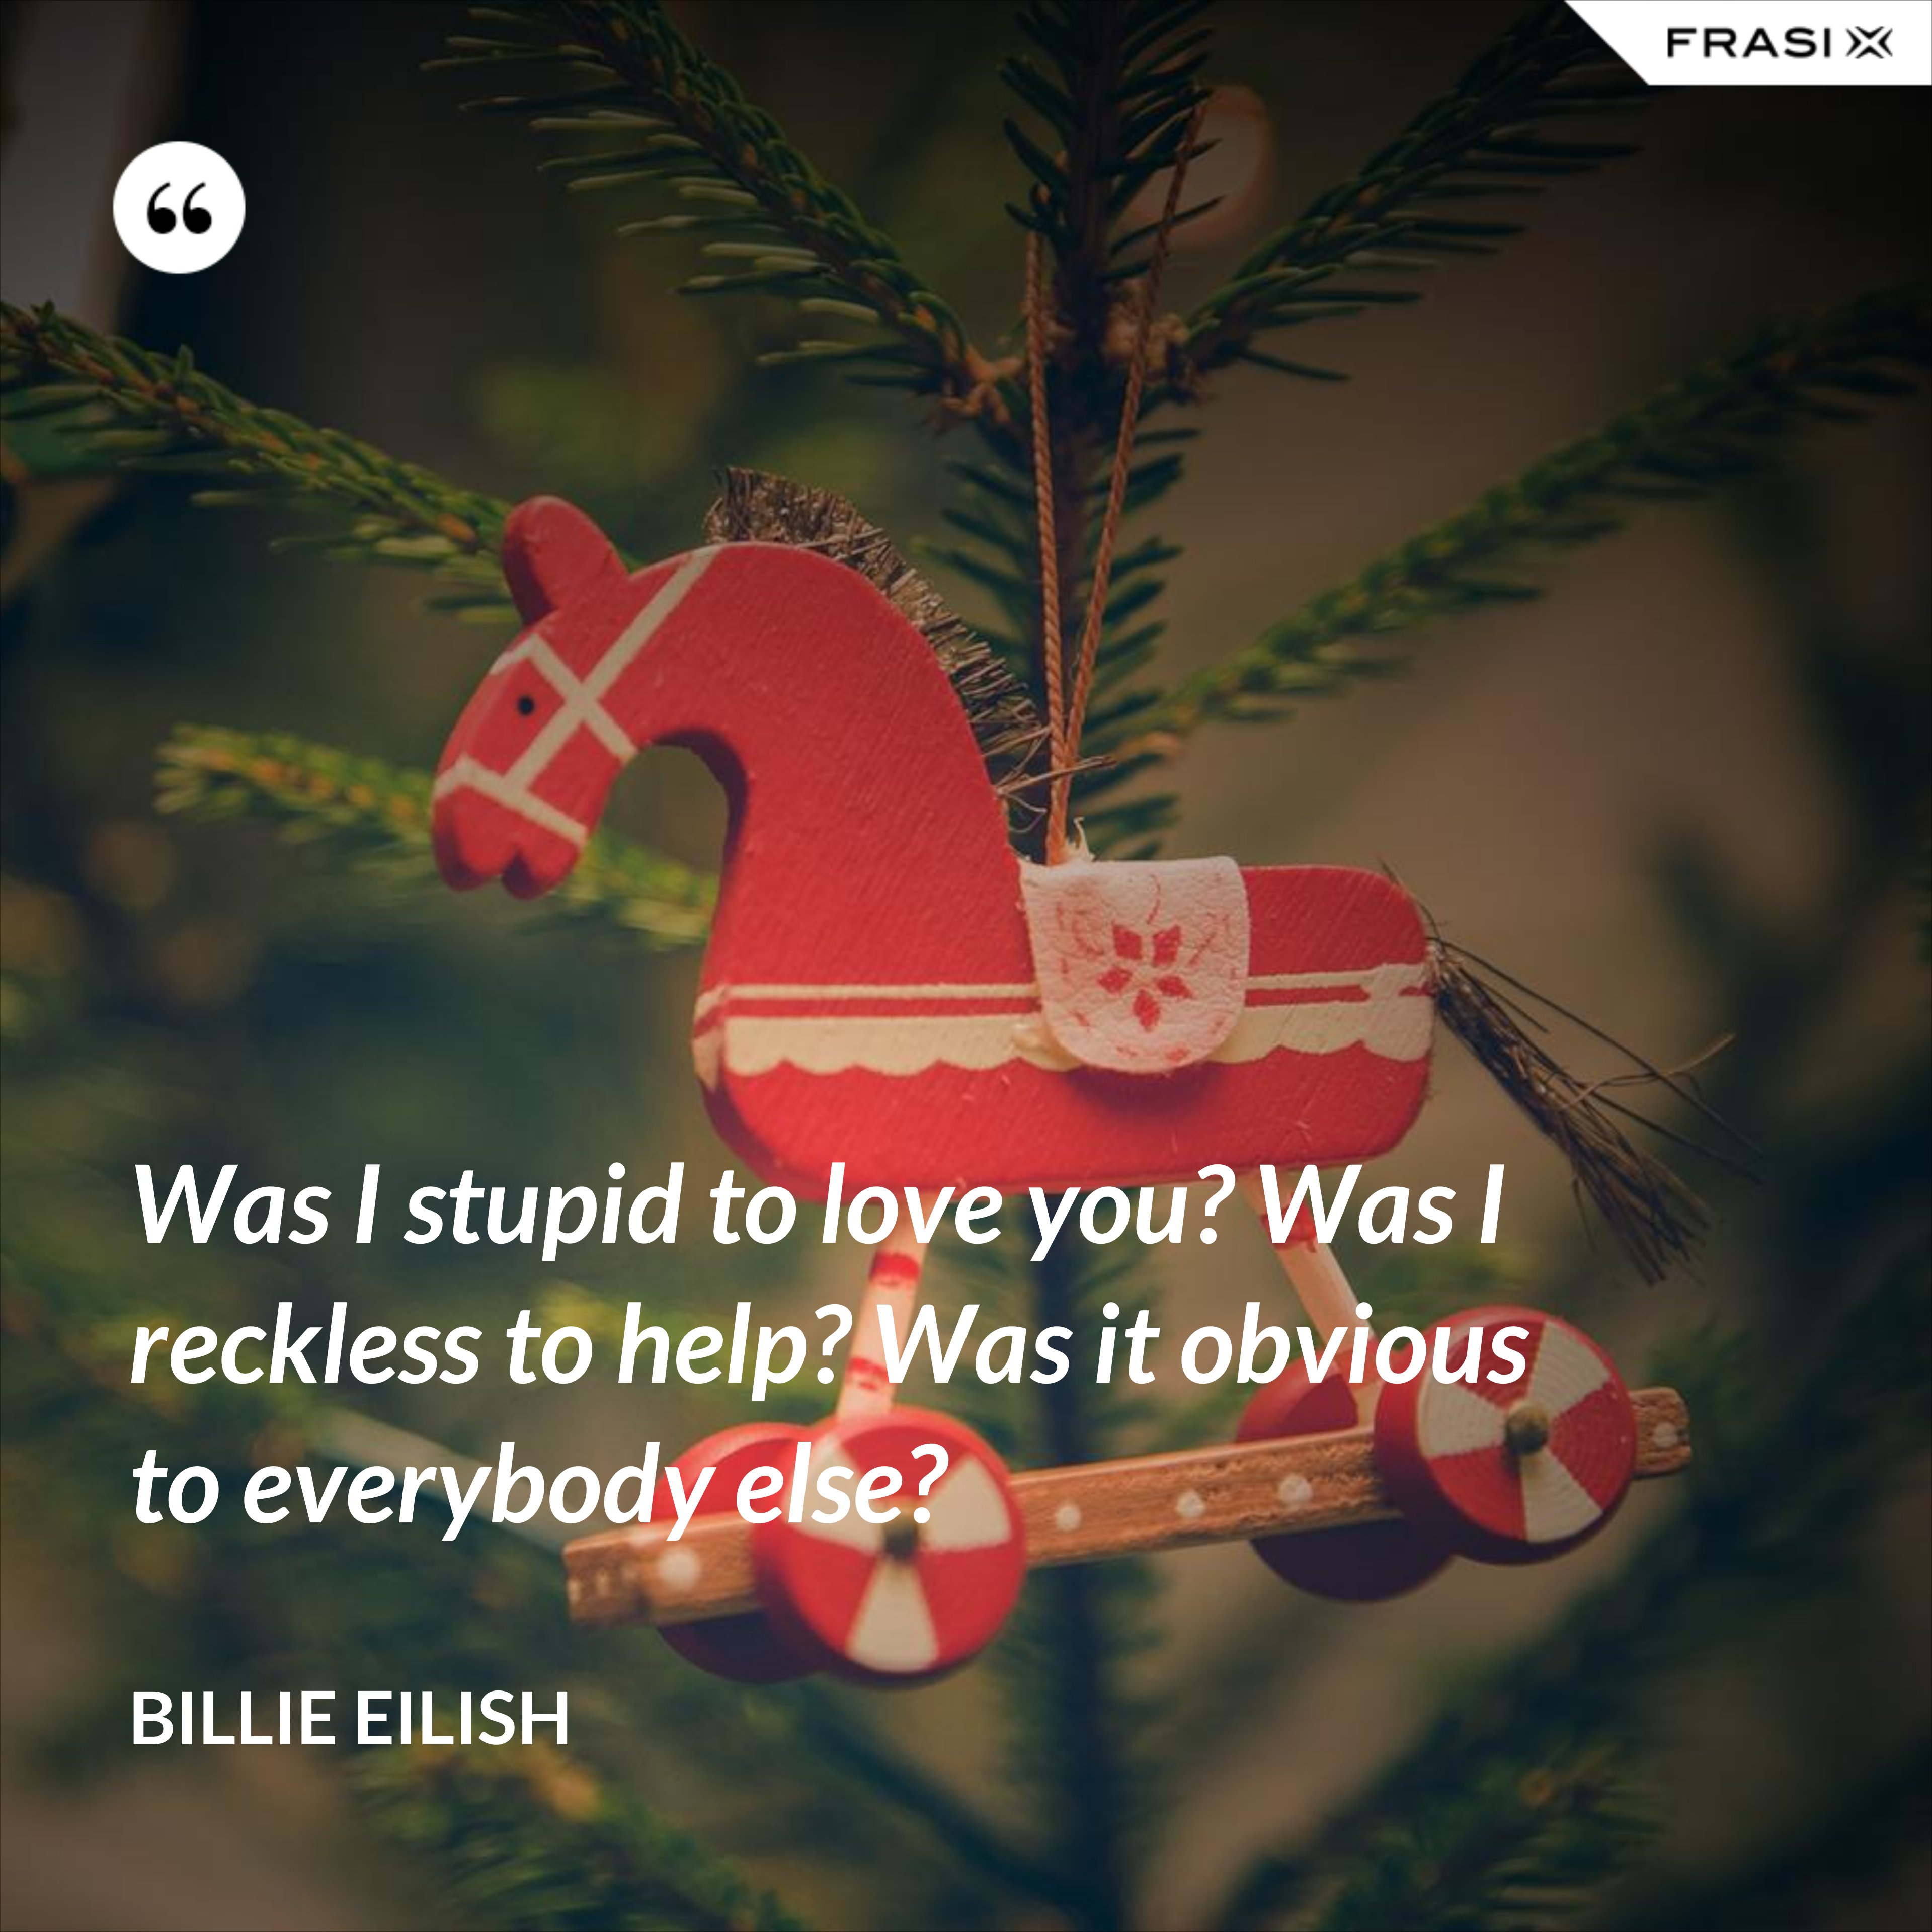 Was I stupid to love you? Was I reckless to help? Was it obvious to everybody else? - Billie Eilish